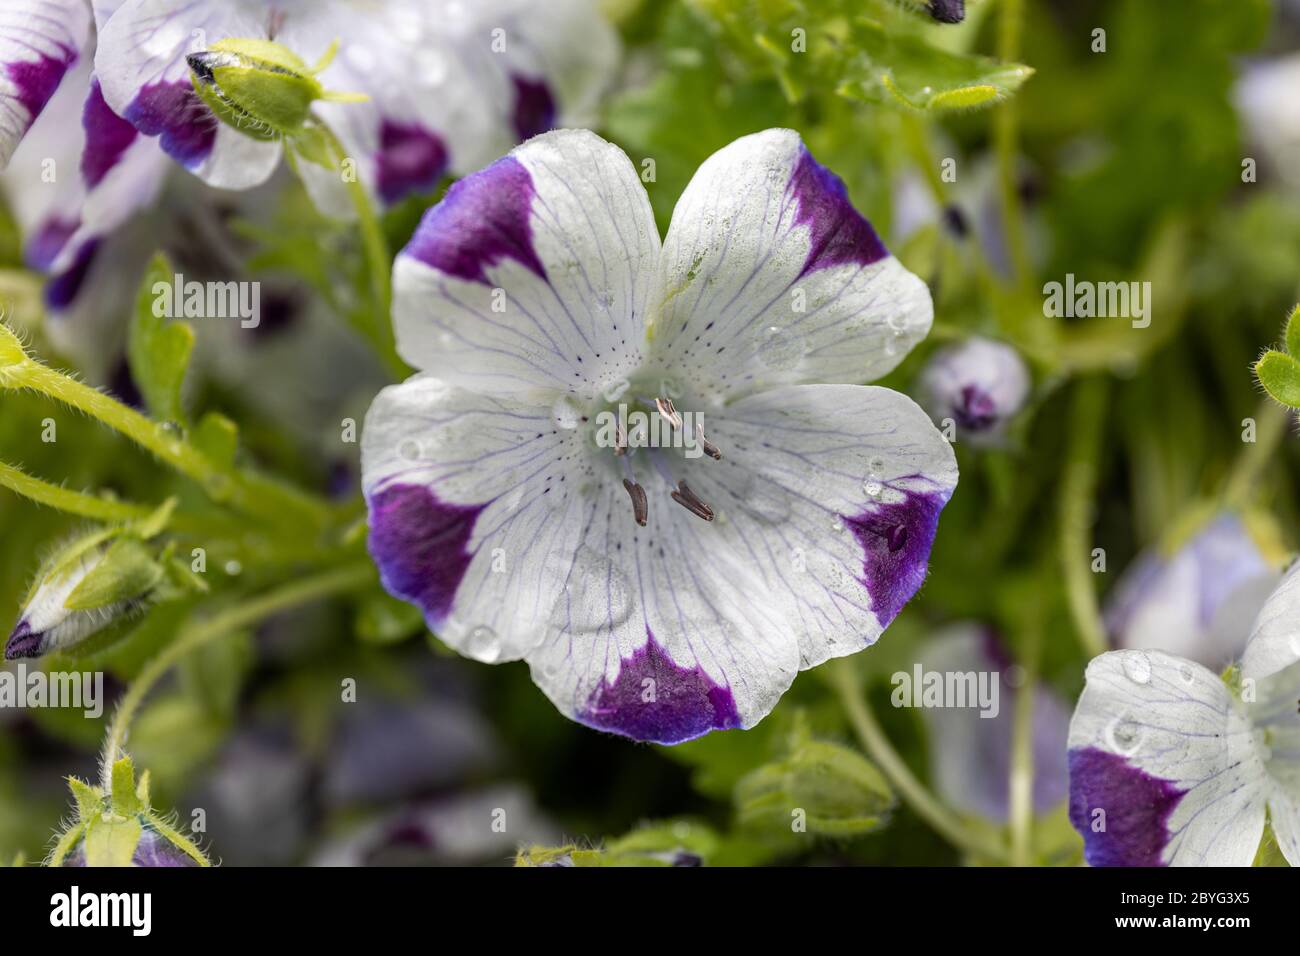 Water beads on white flower with dark veins and dots and purple-spotted lobe tips. Fivespot (Nemophila maculata). Stock Photo